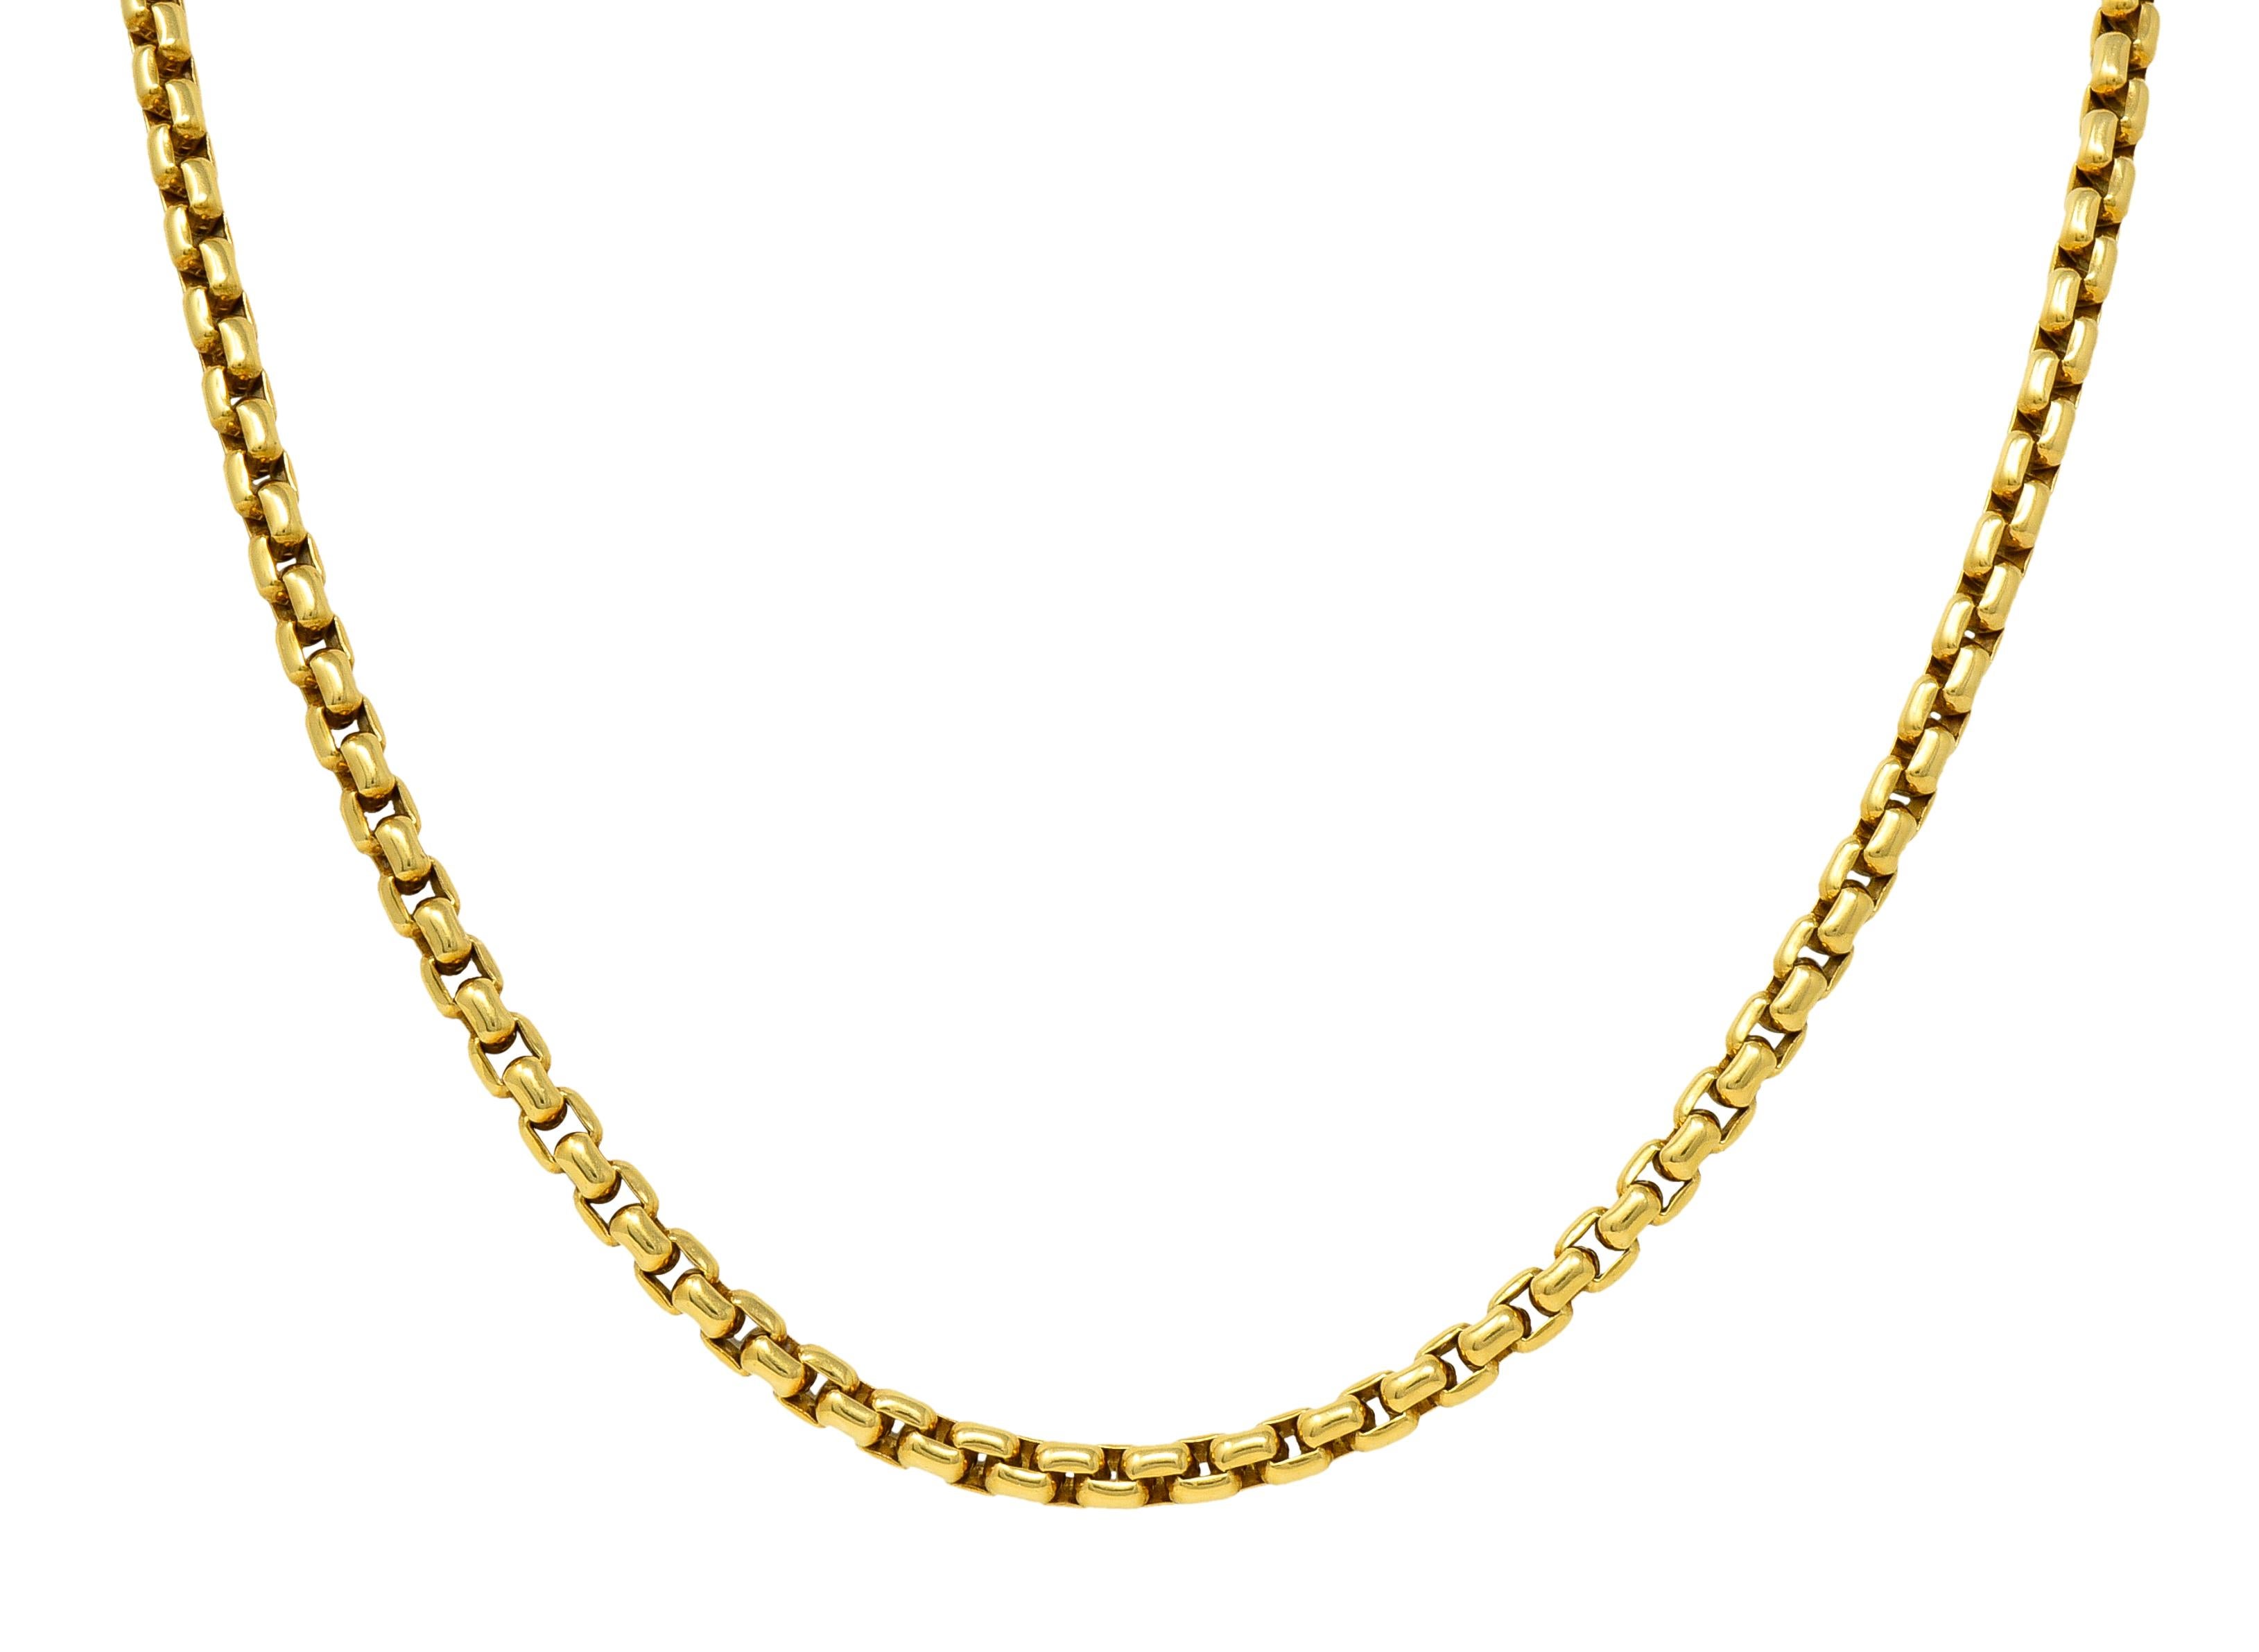 Tiffany & Co. 18 Karat Yellow Gold Vintage Unisex Box Chain 20 IN Necklace 4